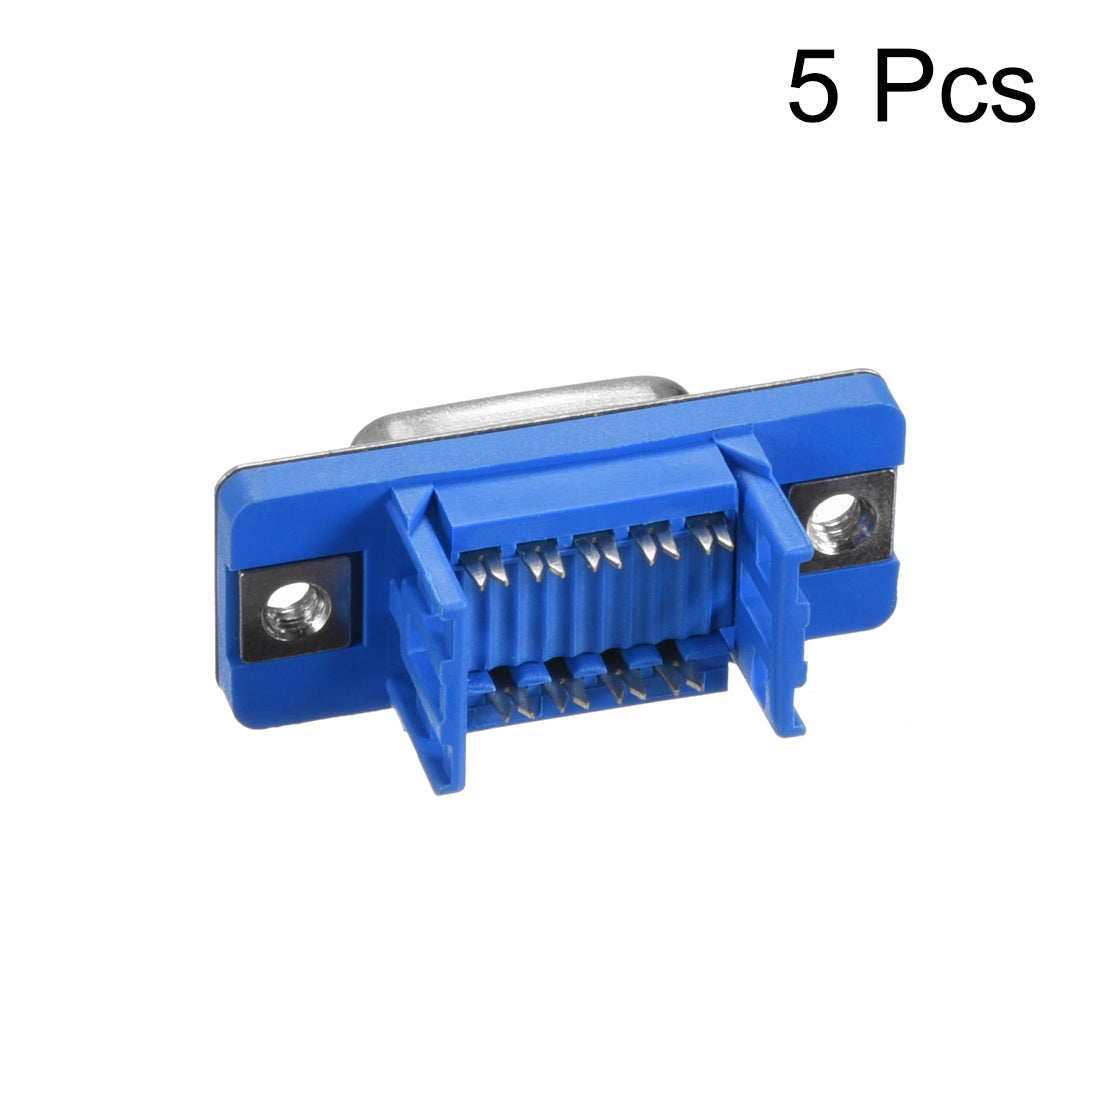 uxcell Uxcell IDC D-Sub Ribbon Cable Connector 9-pin 2-row Female Socket IDC Crimp Port Terminal Breakout for Flat Ribbon Cable Blue 5pcs